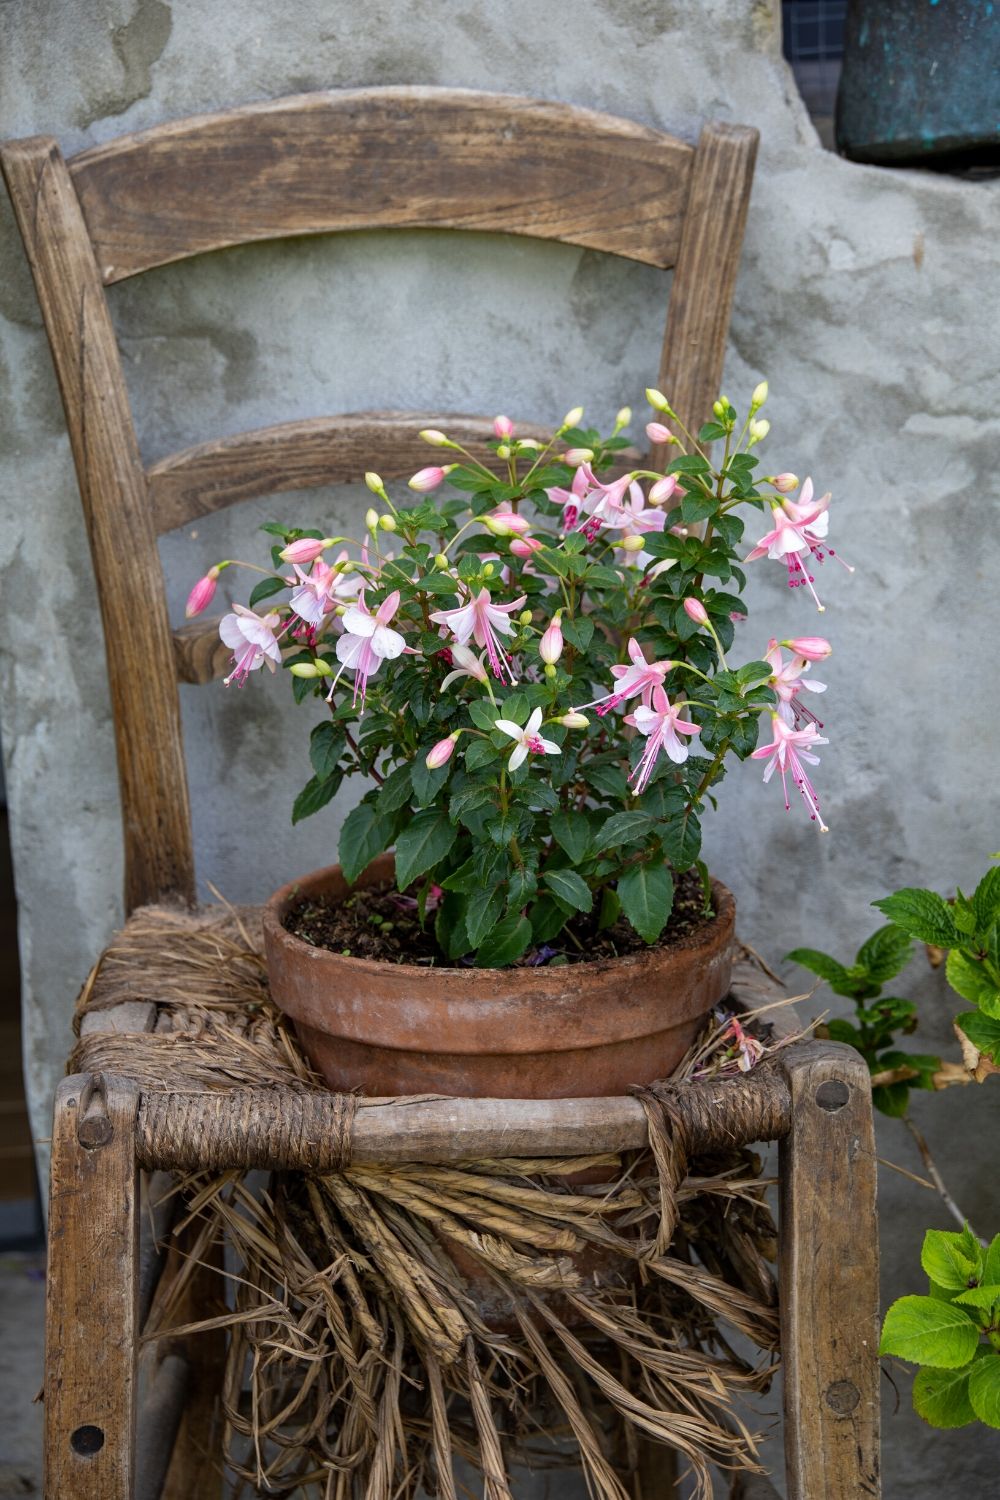 A terracotta vase with a shadow dancer plant with pink flowers nested in an old broken wooden straw chair.